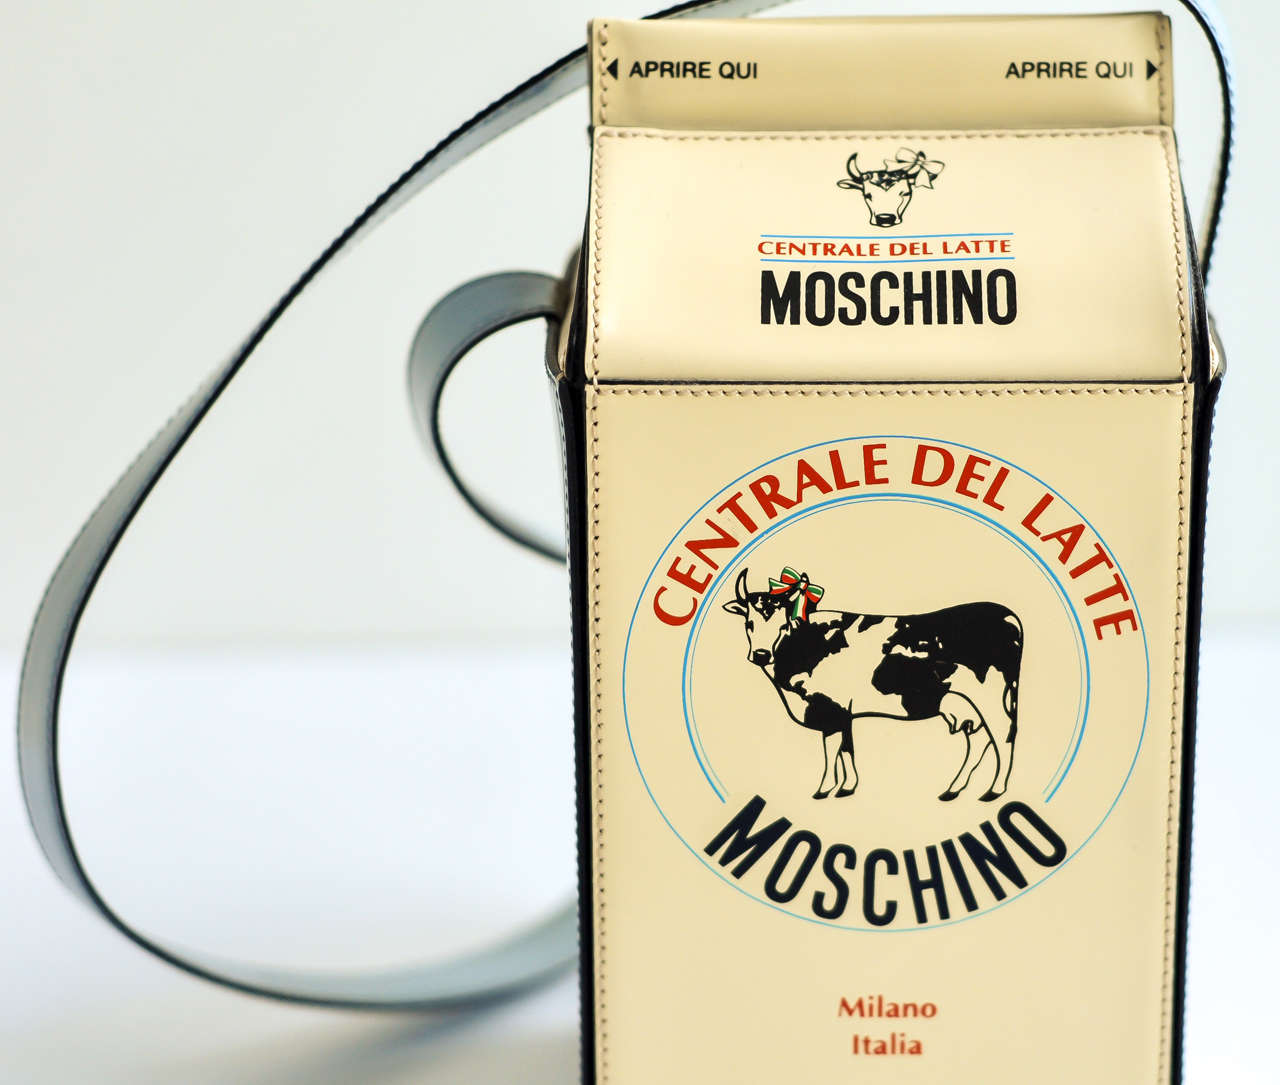 Another highly collectible, vintage handbag by Moschino in the shape of a milk carton. The bag combines a clever design with witty, thought-provoking text.
Includes original protective cloth bag.